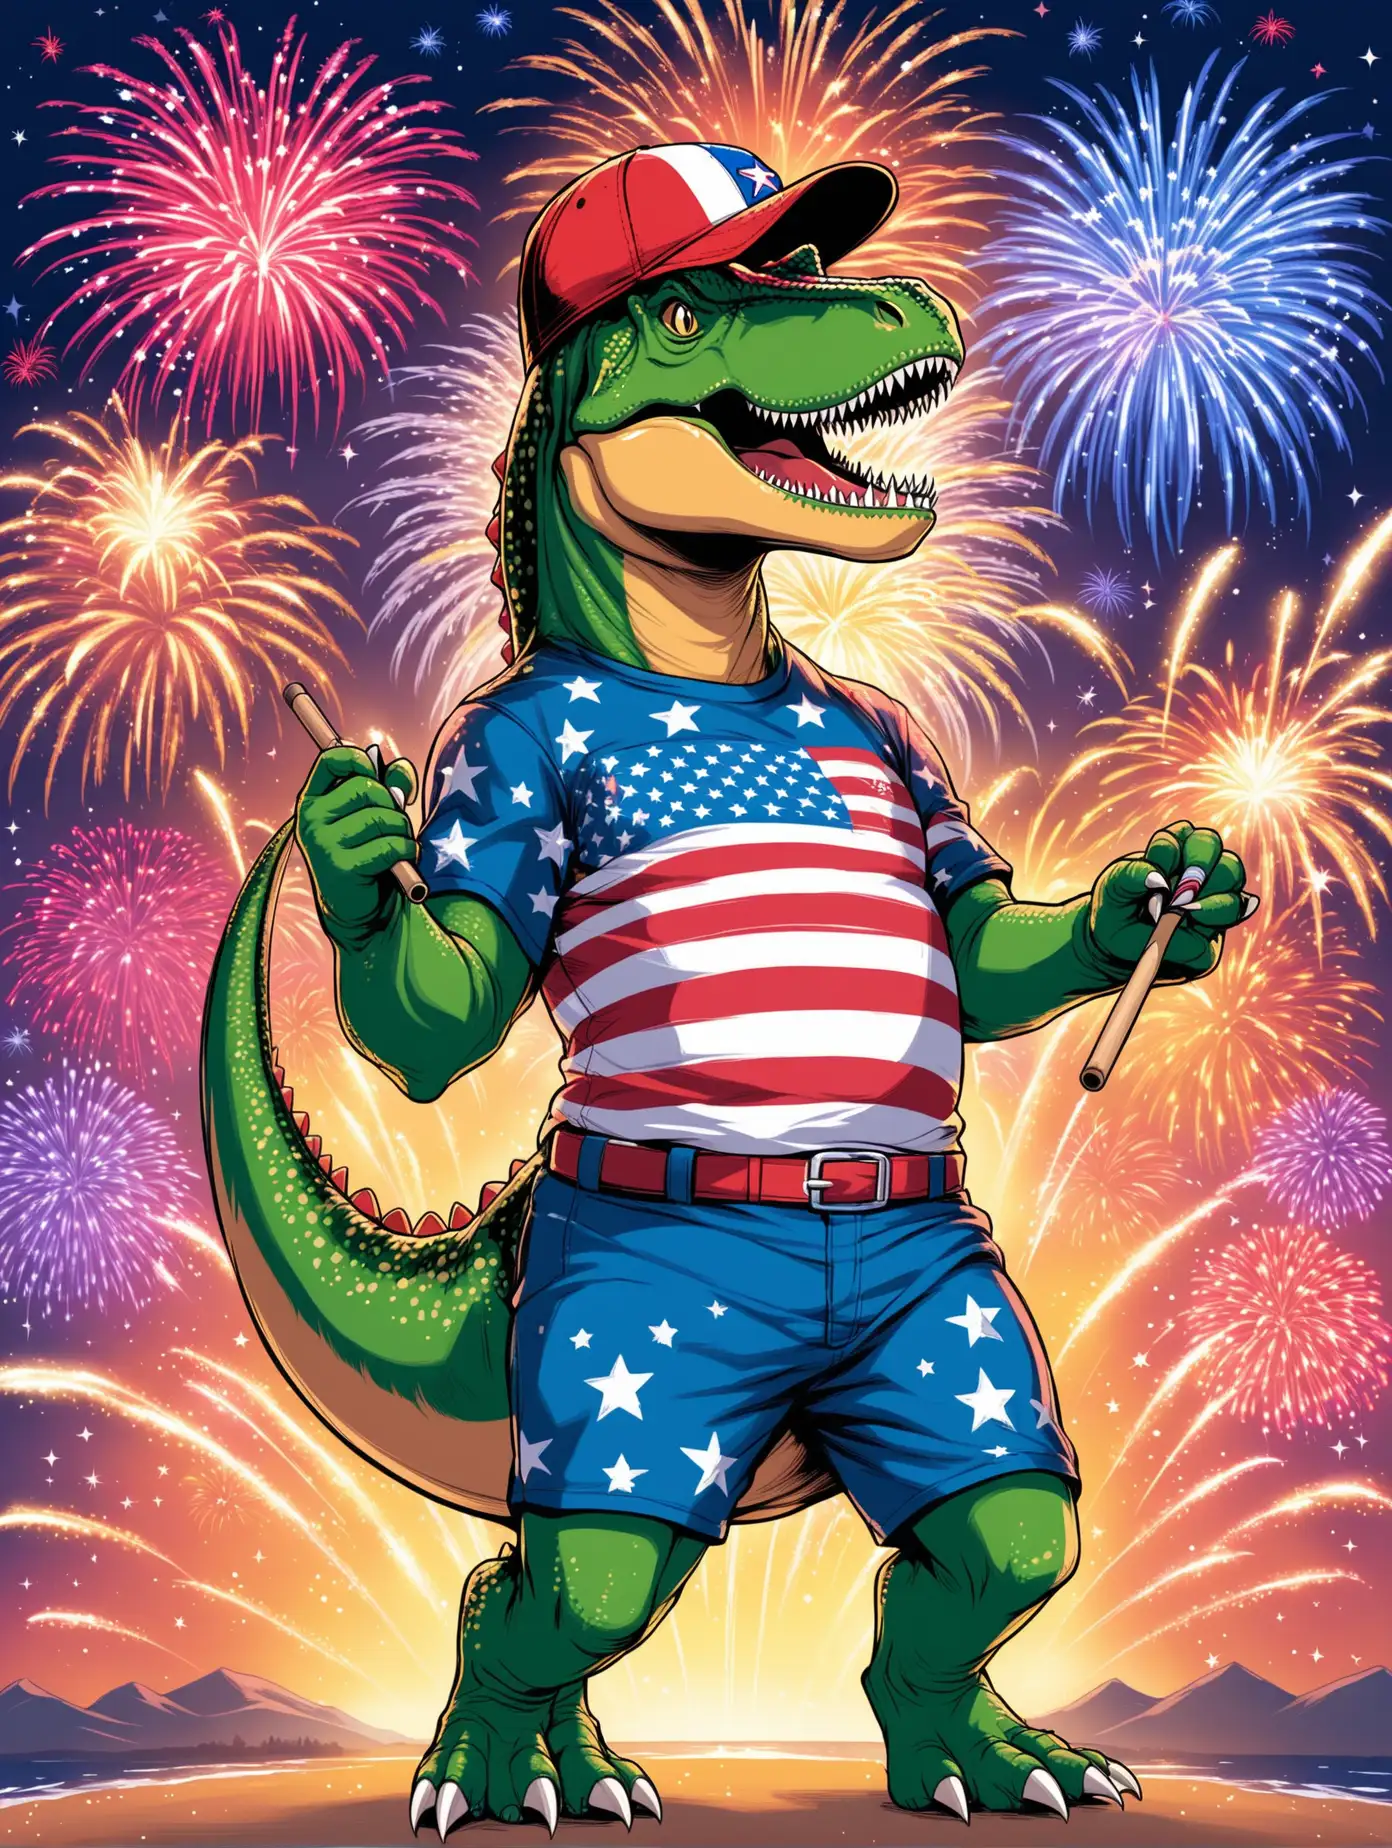 TRex Dinosaur in Patriotic Outfit Celebrating Fourth of July with Fireworks